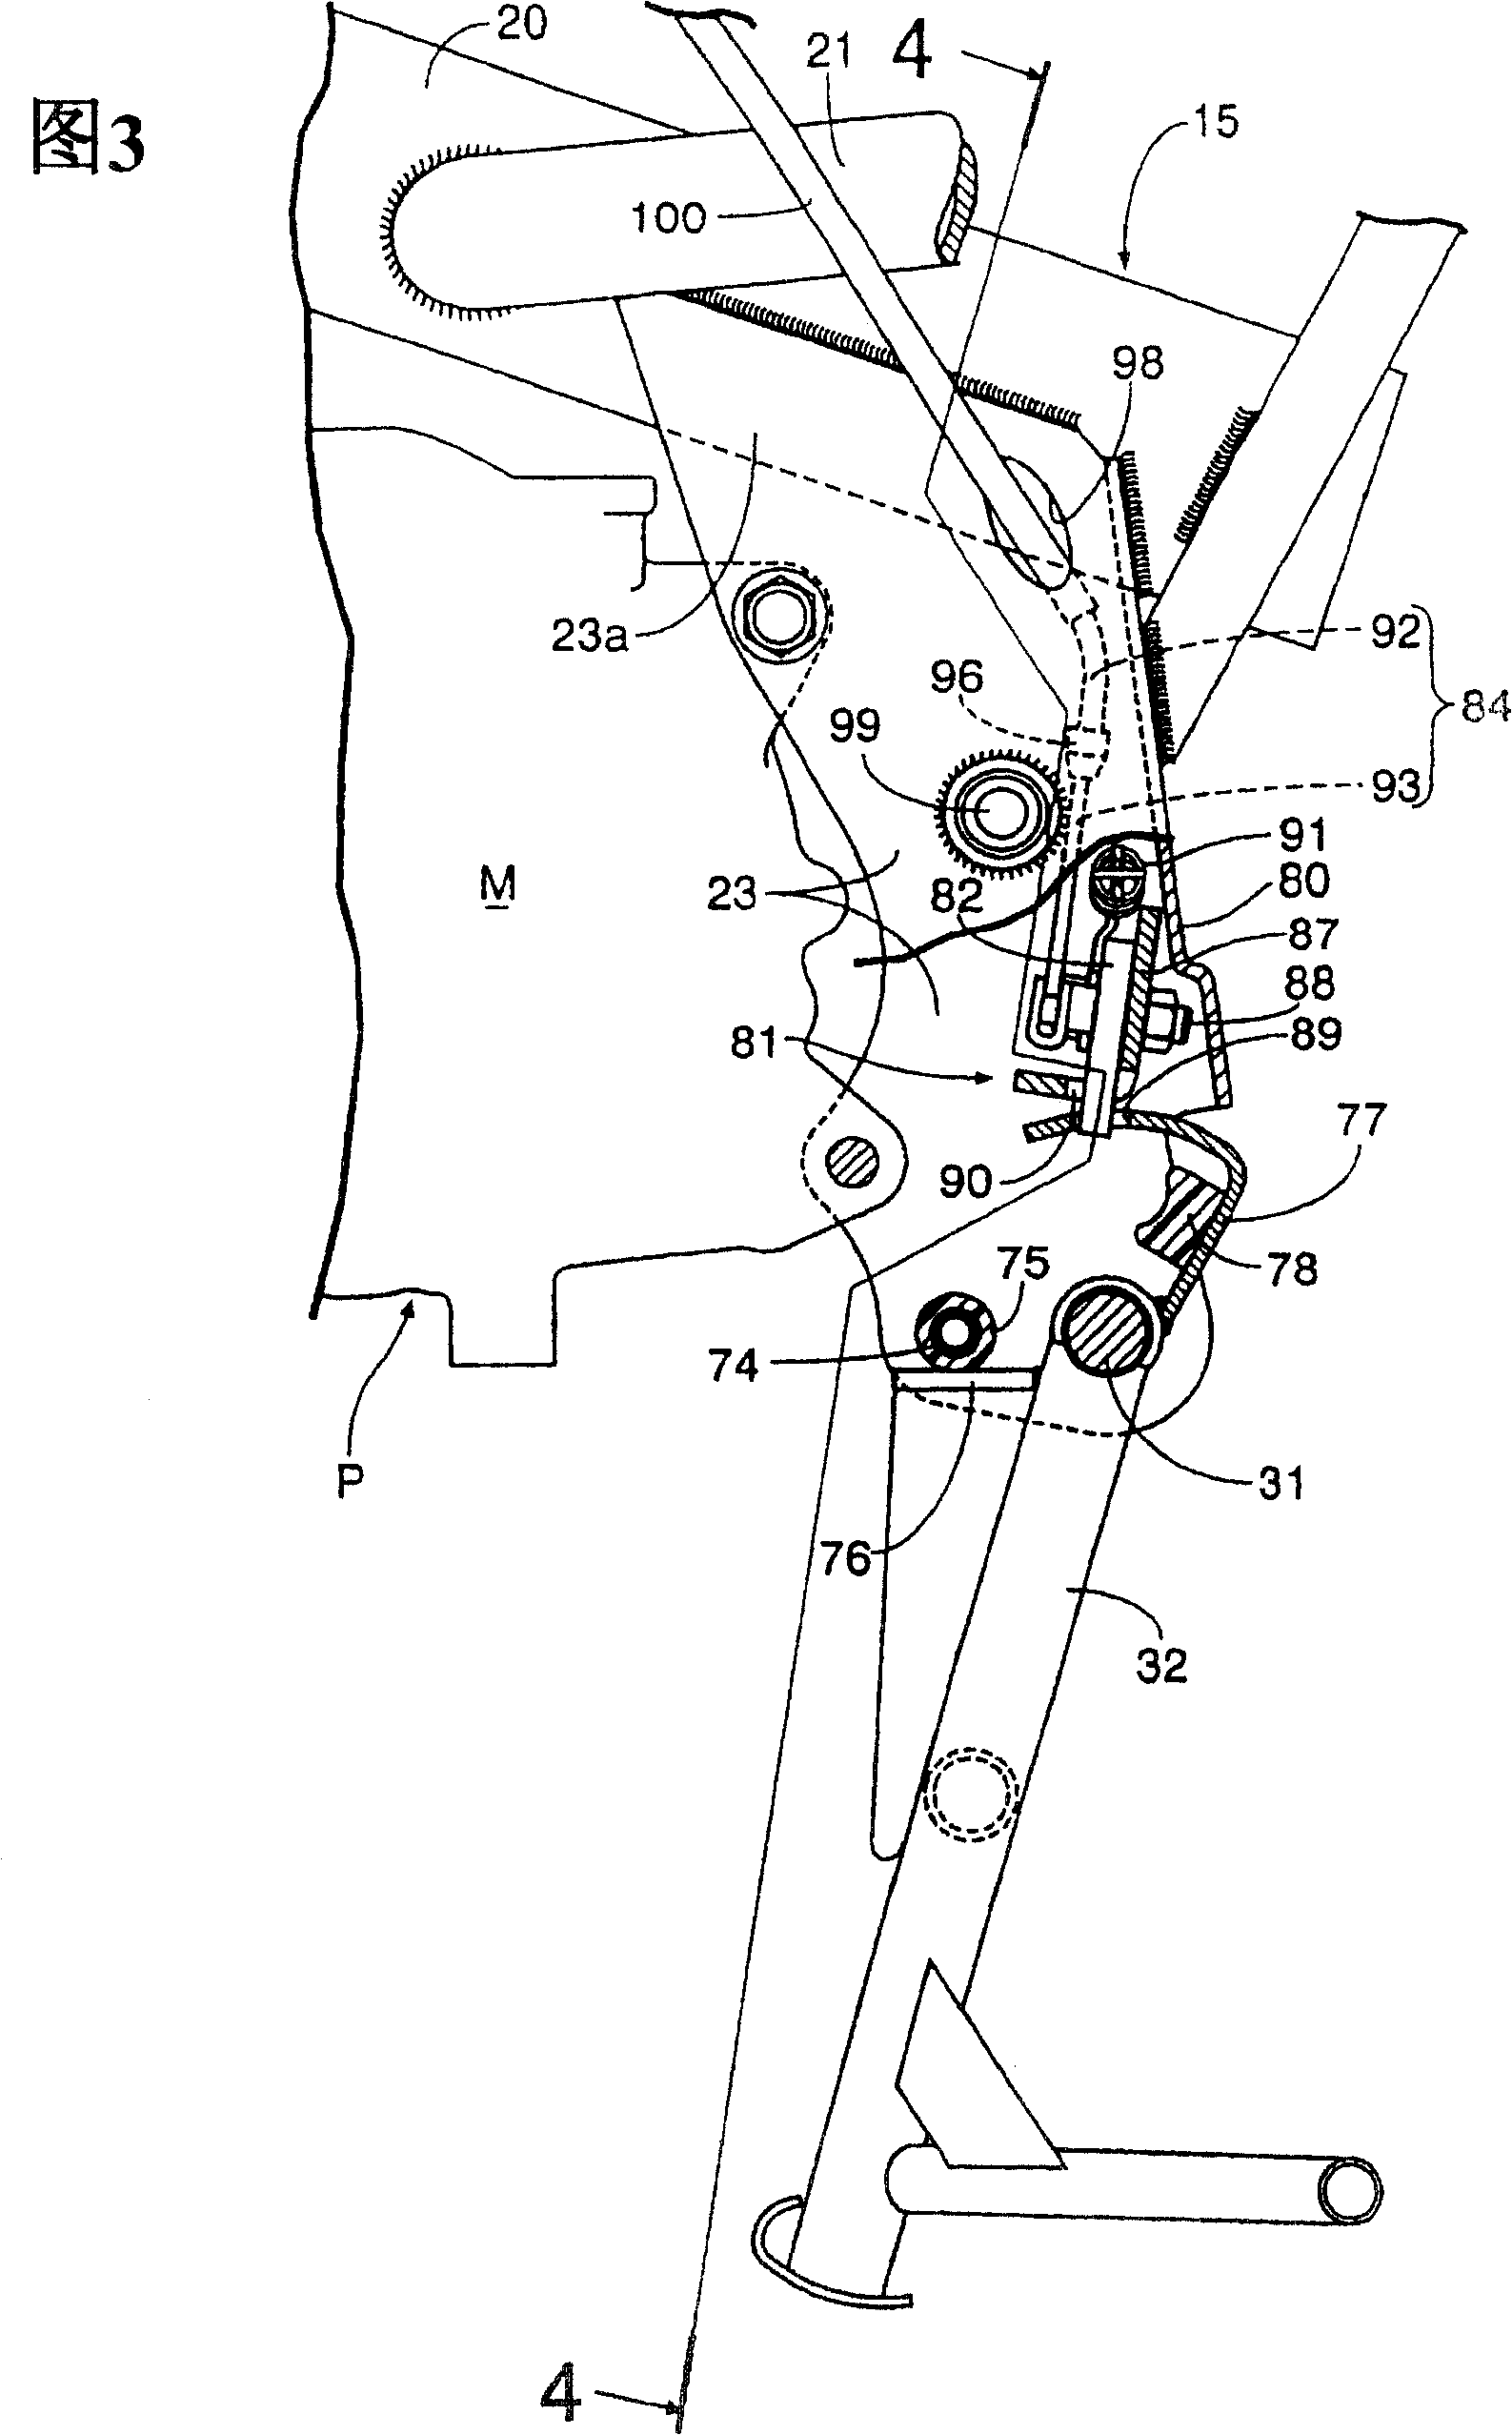 Automatic bicycle with rack locking device